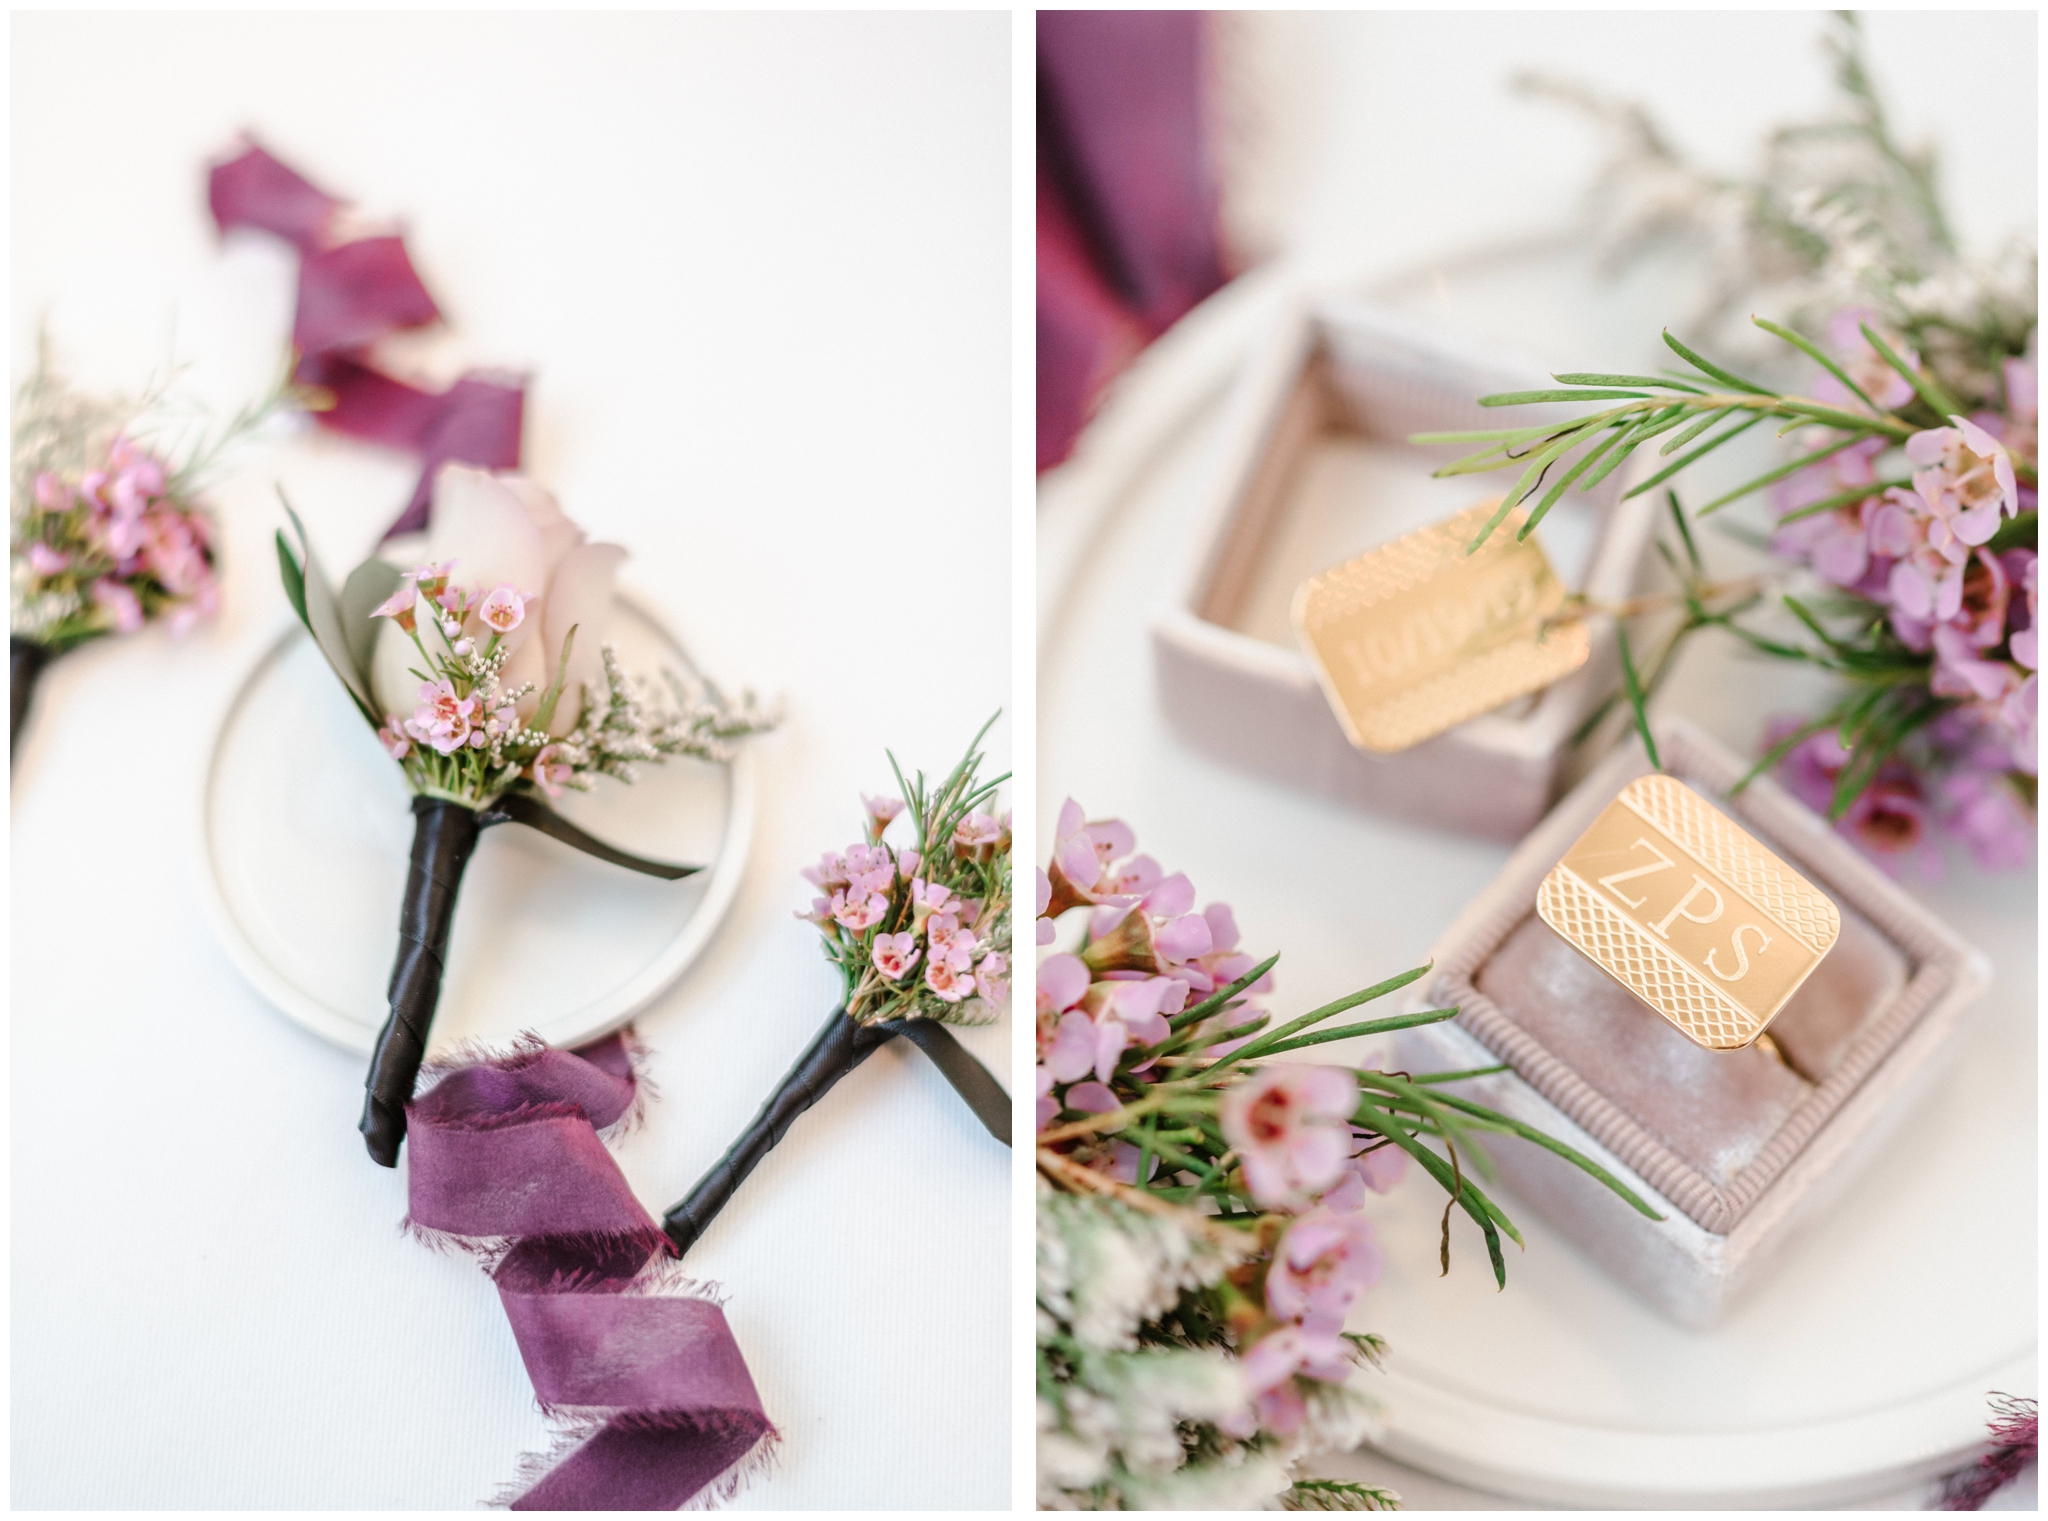 Violet and gold wedding inspiration, with purple bouquets